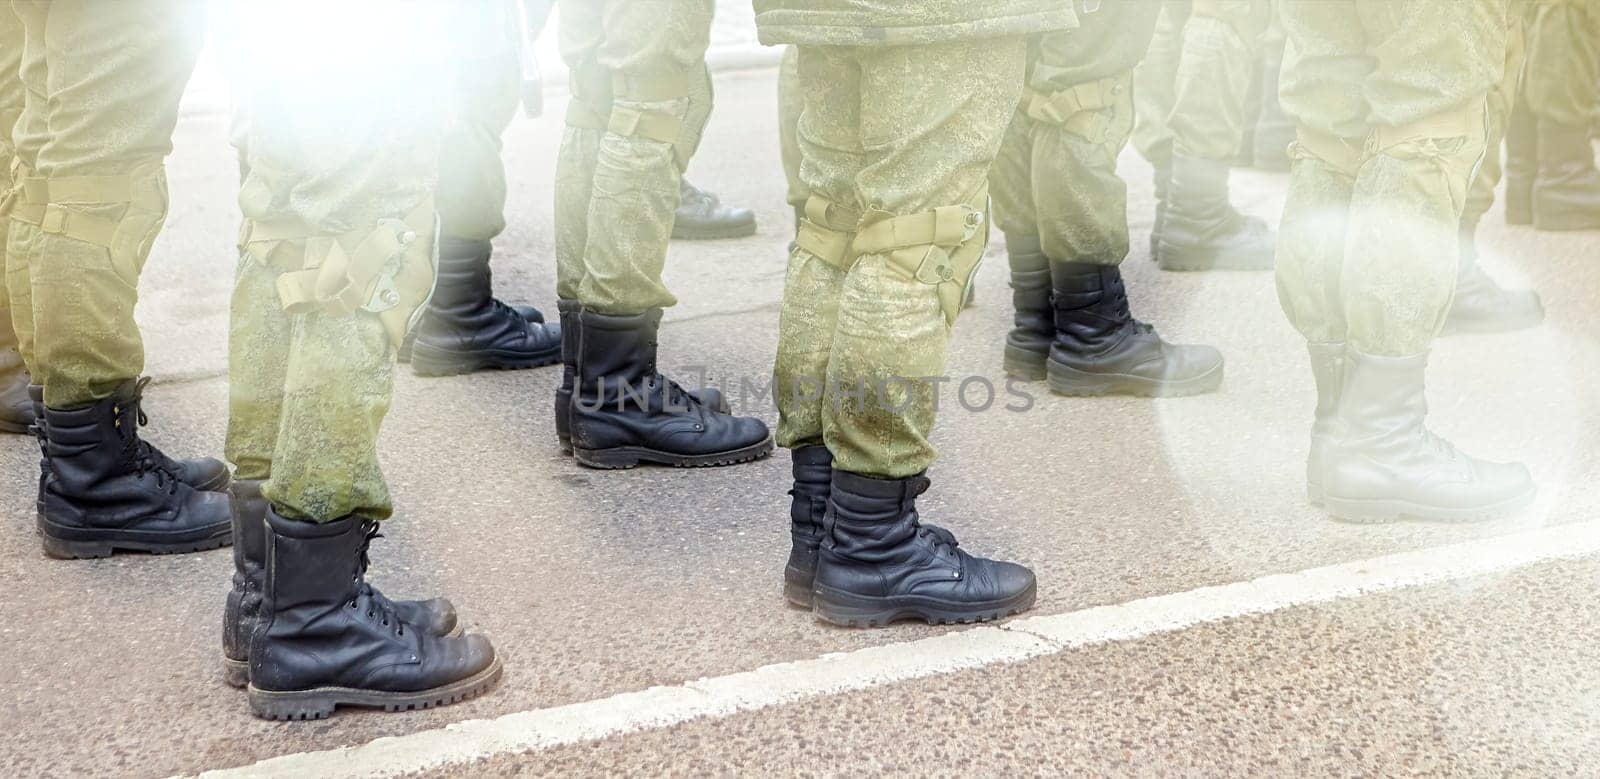 Army Soldiers In Uniform Standing In A Row On Parade Ground During Inspection by Hil